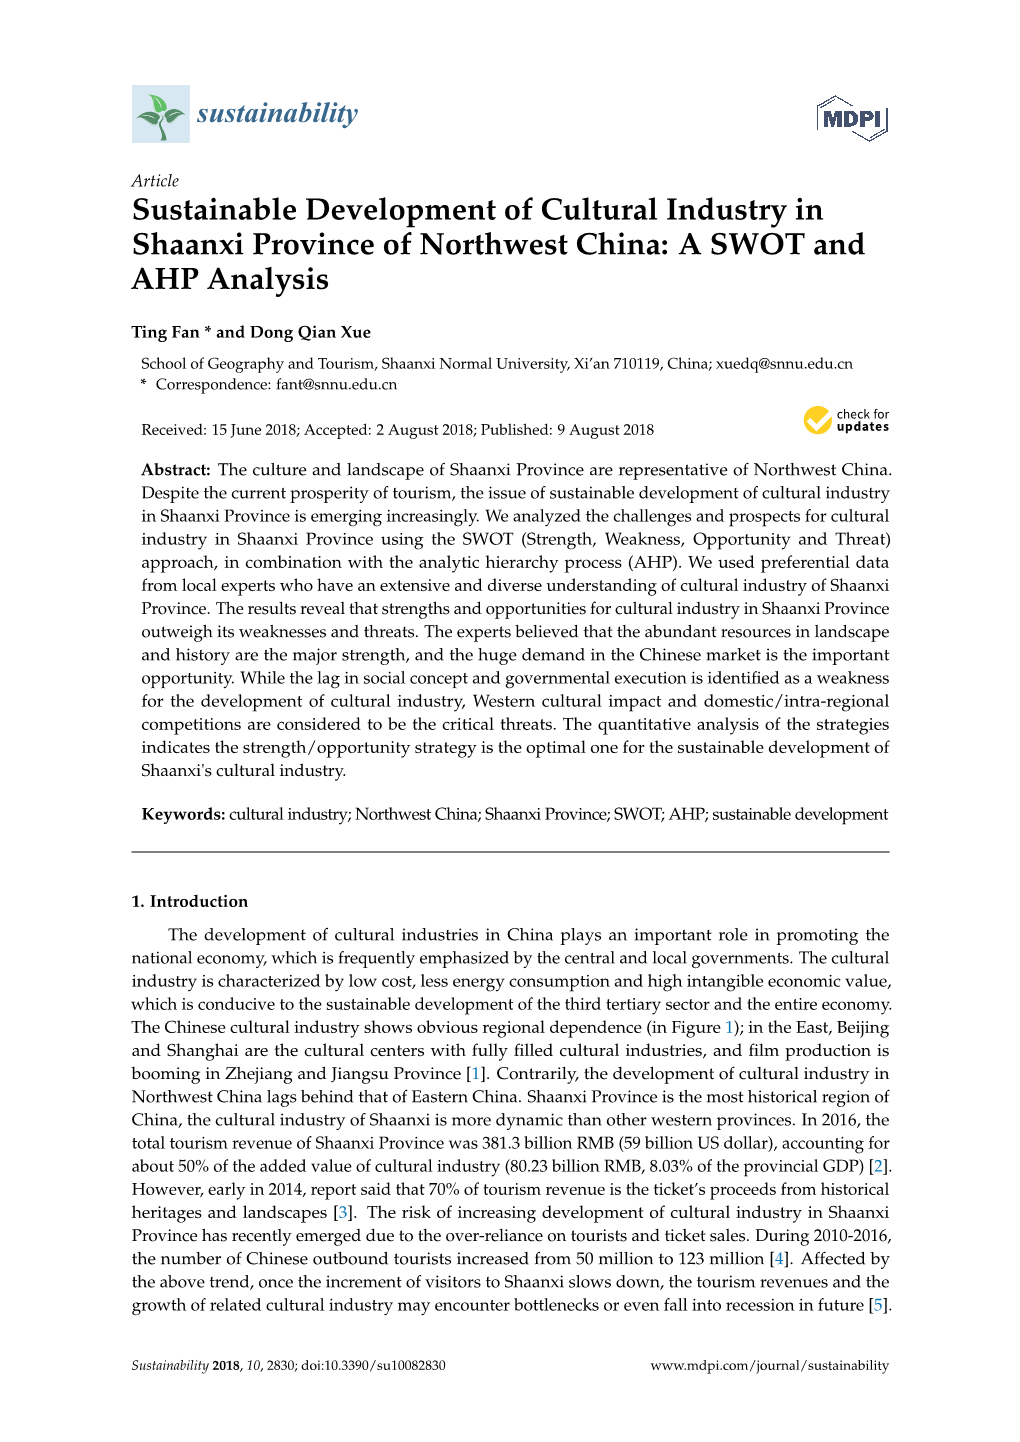 Sustainable Development of Cultural Industry in Shaanxi Province of Northwest China: a SWOT and AHP Analysis